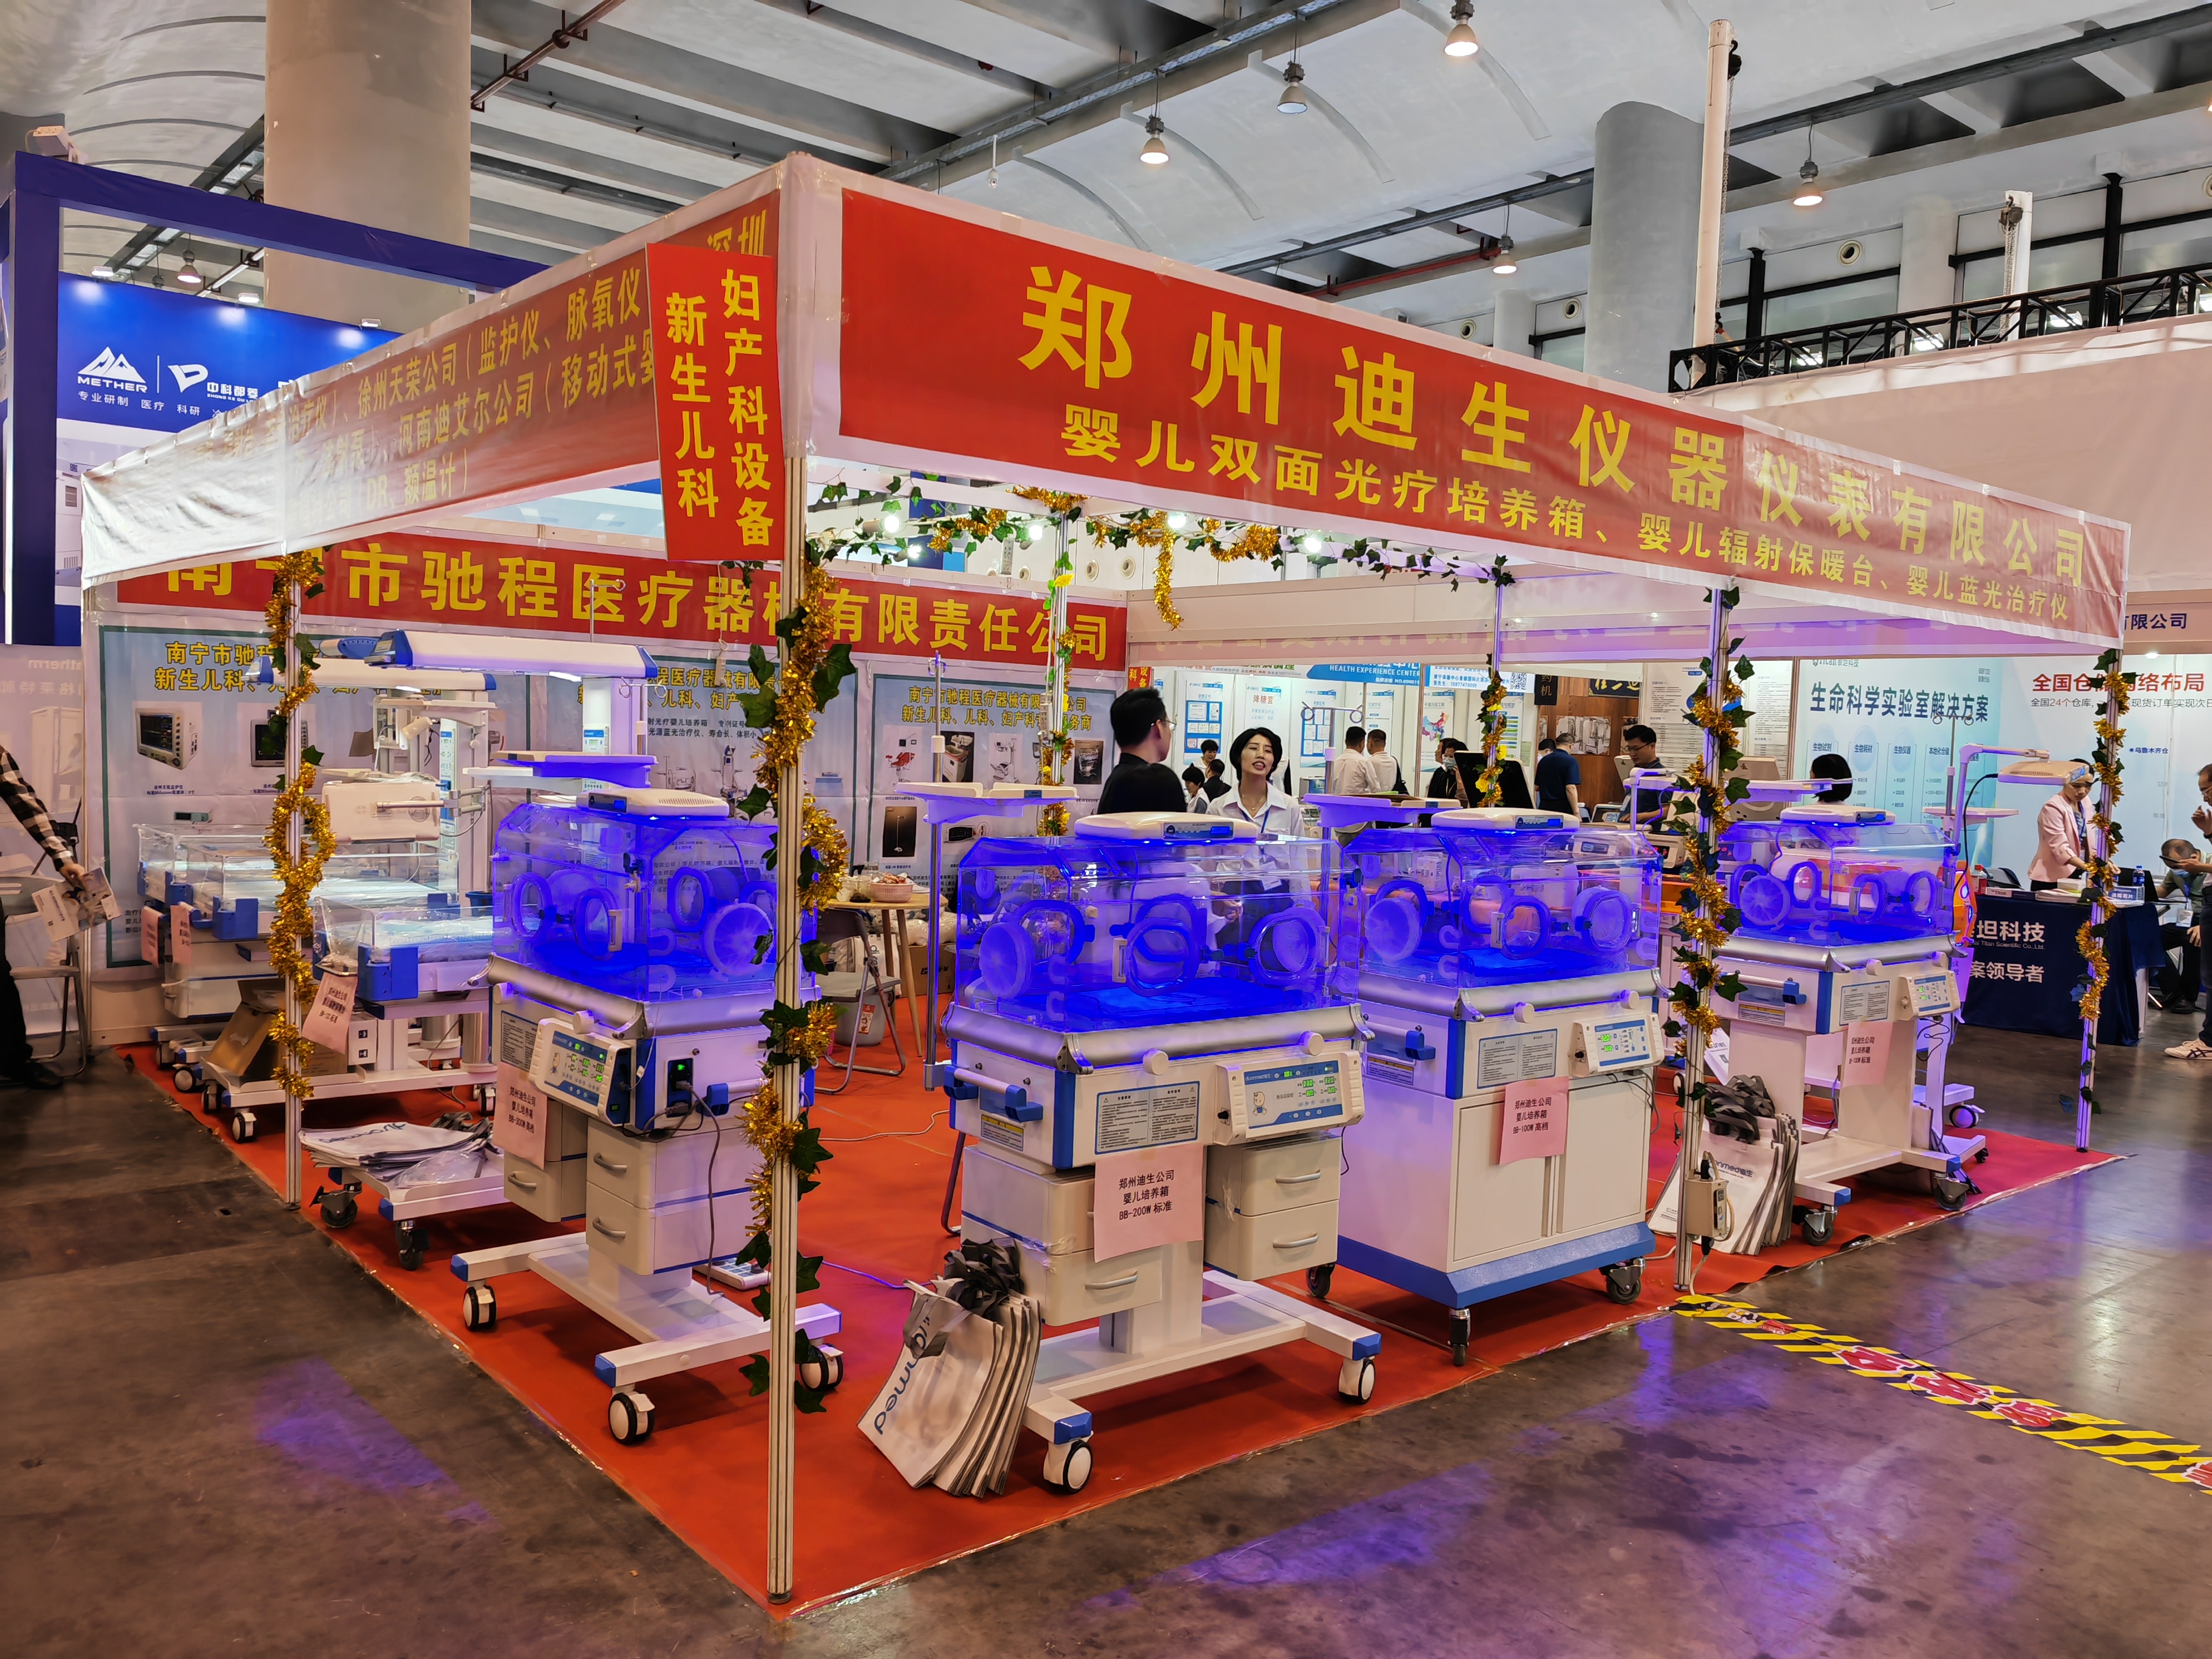 Highlights for Disonmed at Guangxi Medical Equipment Exhibition 2023 